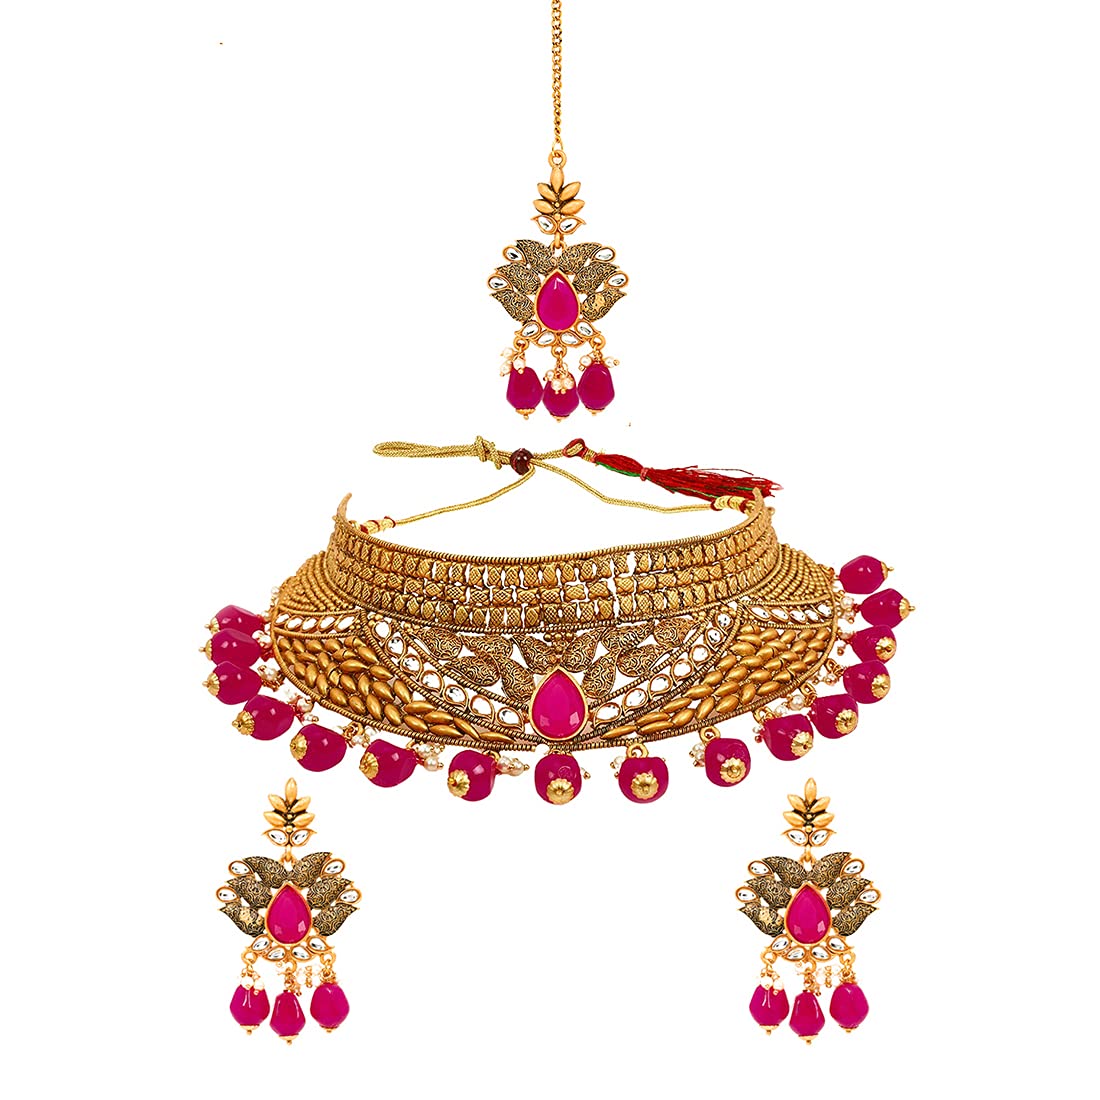 Yellow Chimes Gold Plated Traditional Kundan Studded Pink Pearl Choker Necklace Set with Chandbali Earrings and Maang Tikka Bridal Jewellery Set for Women (YCTJNS-09BDSCHK-PK, Gold, Pink, Medium)